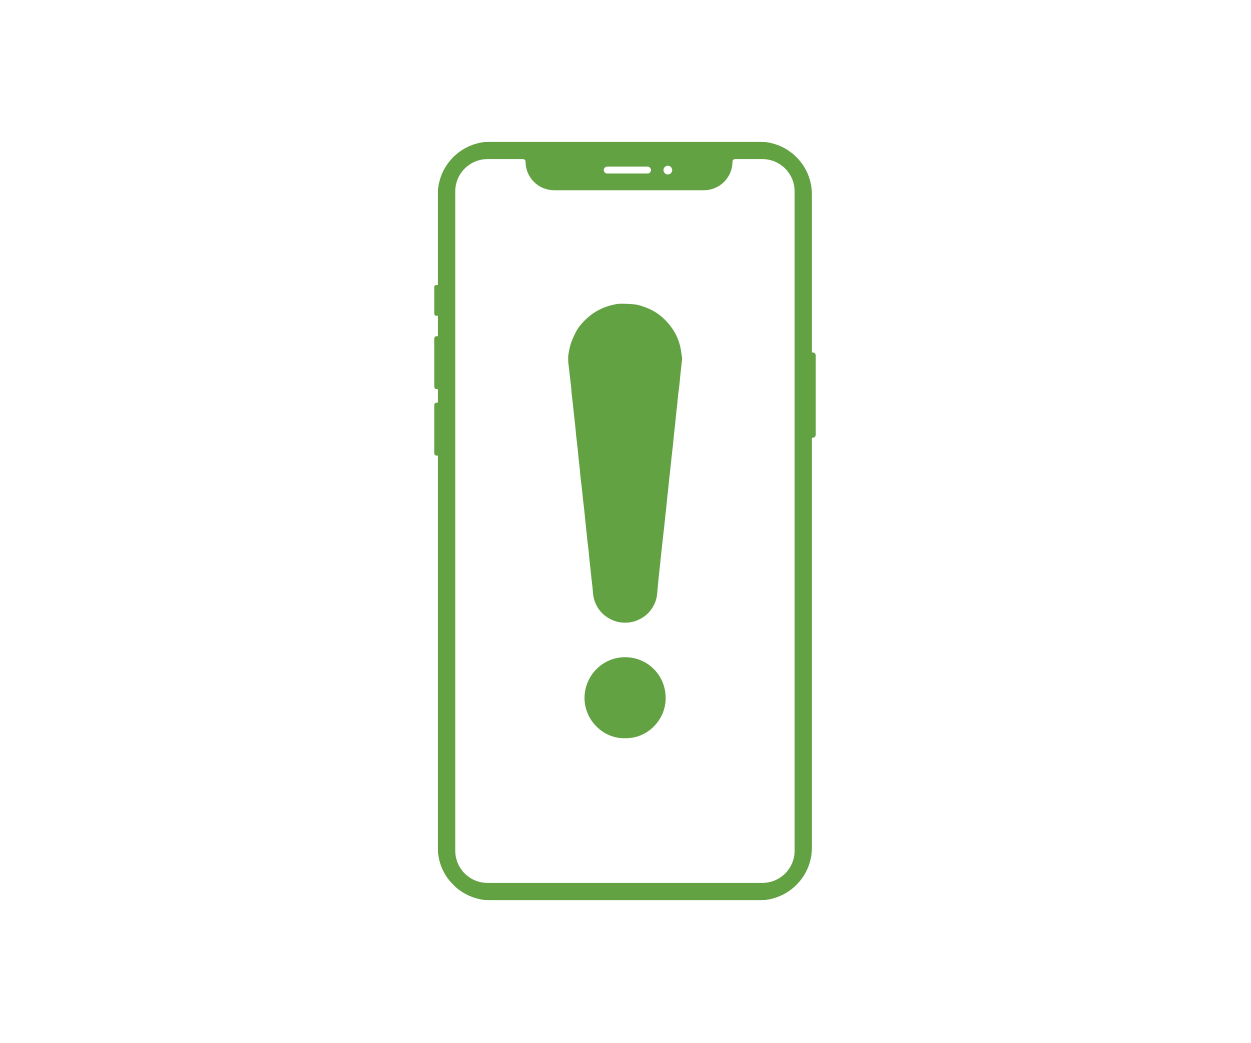 Smartphone icon with an exclamation point on the screen. This icon is used to hyperlink to HT's SAFETY, FRAUD, WASTE & ABUSE HOTLINE